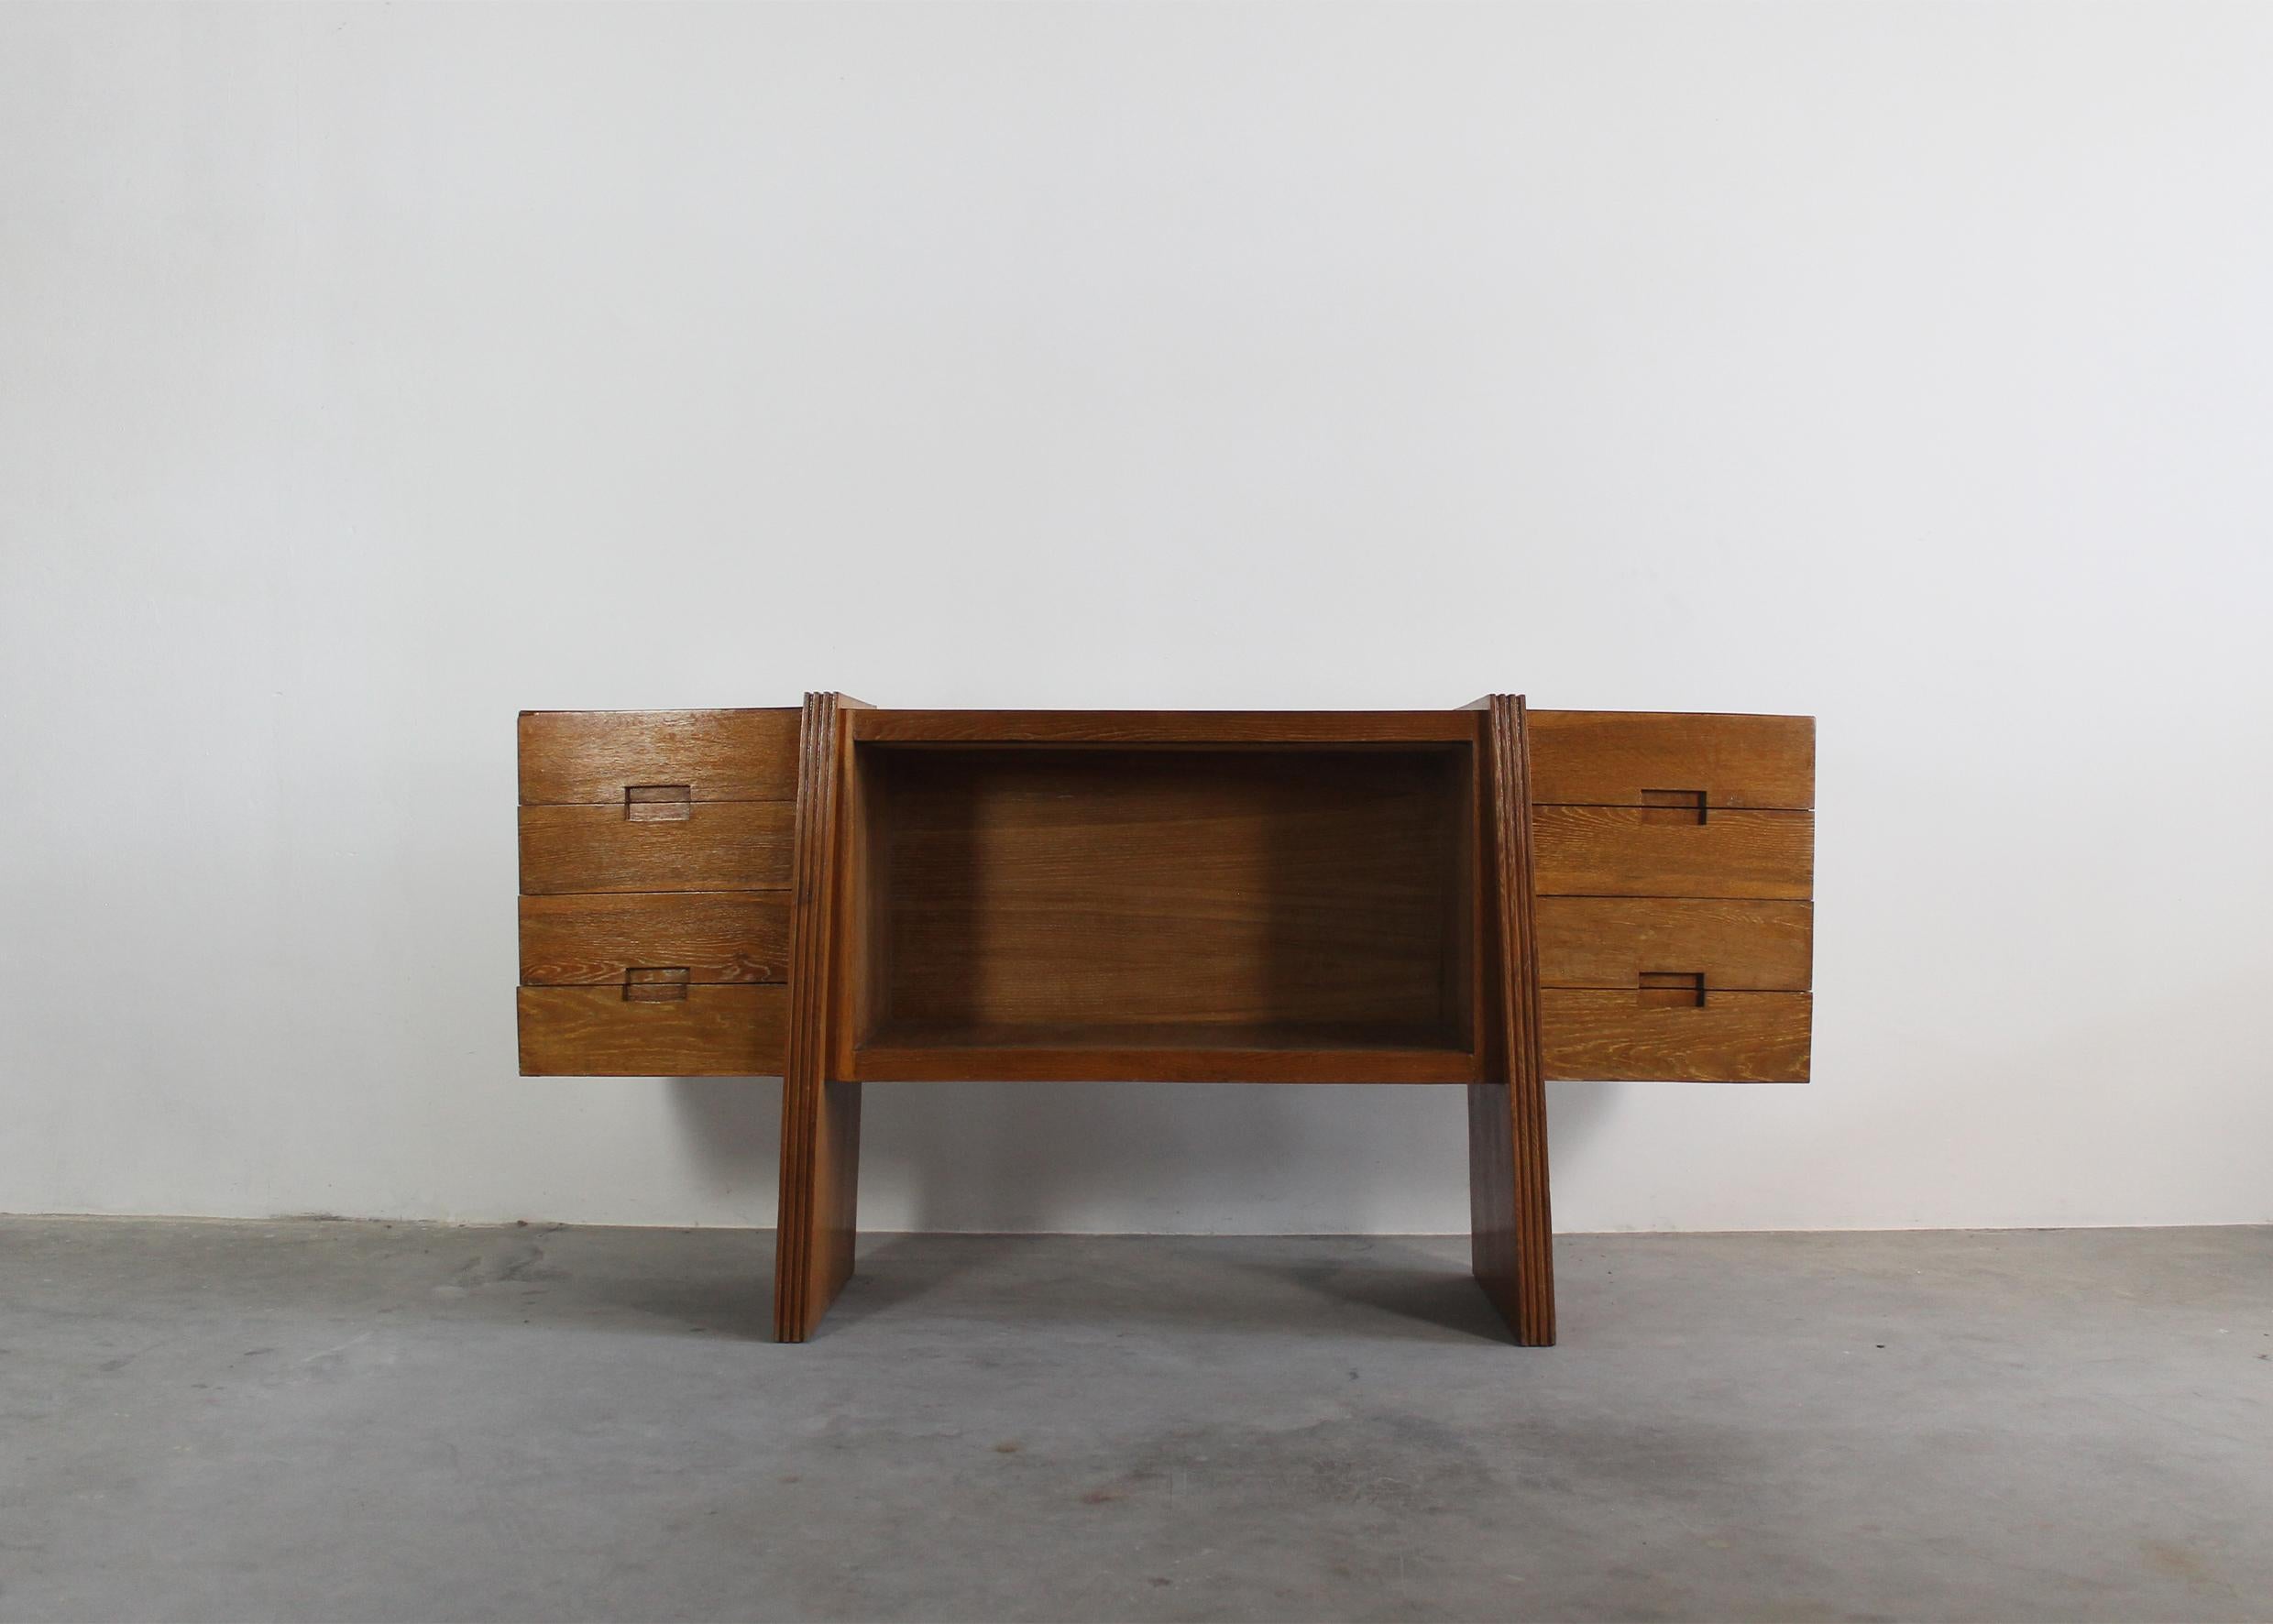 Large sideboard is entirely realized in oak wood, with four drawers on each side (for a total of eight drawers) and a central storage unit. 

Designed by Pier Luigi Colli Italian Manufacture from 1938 ca.

To reconstruct the story of Pier Luigi